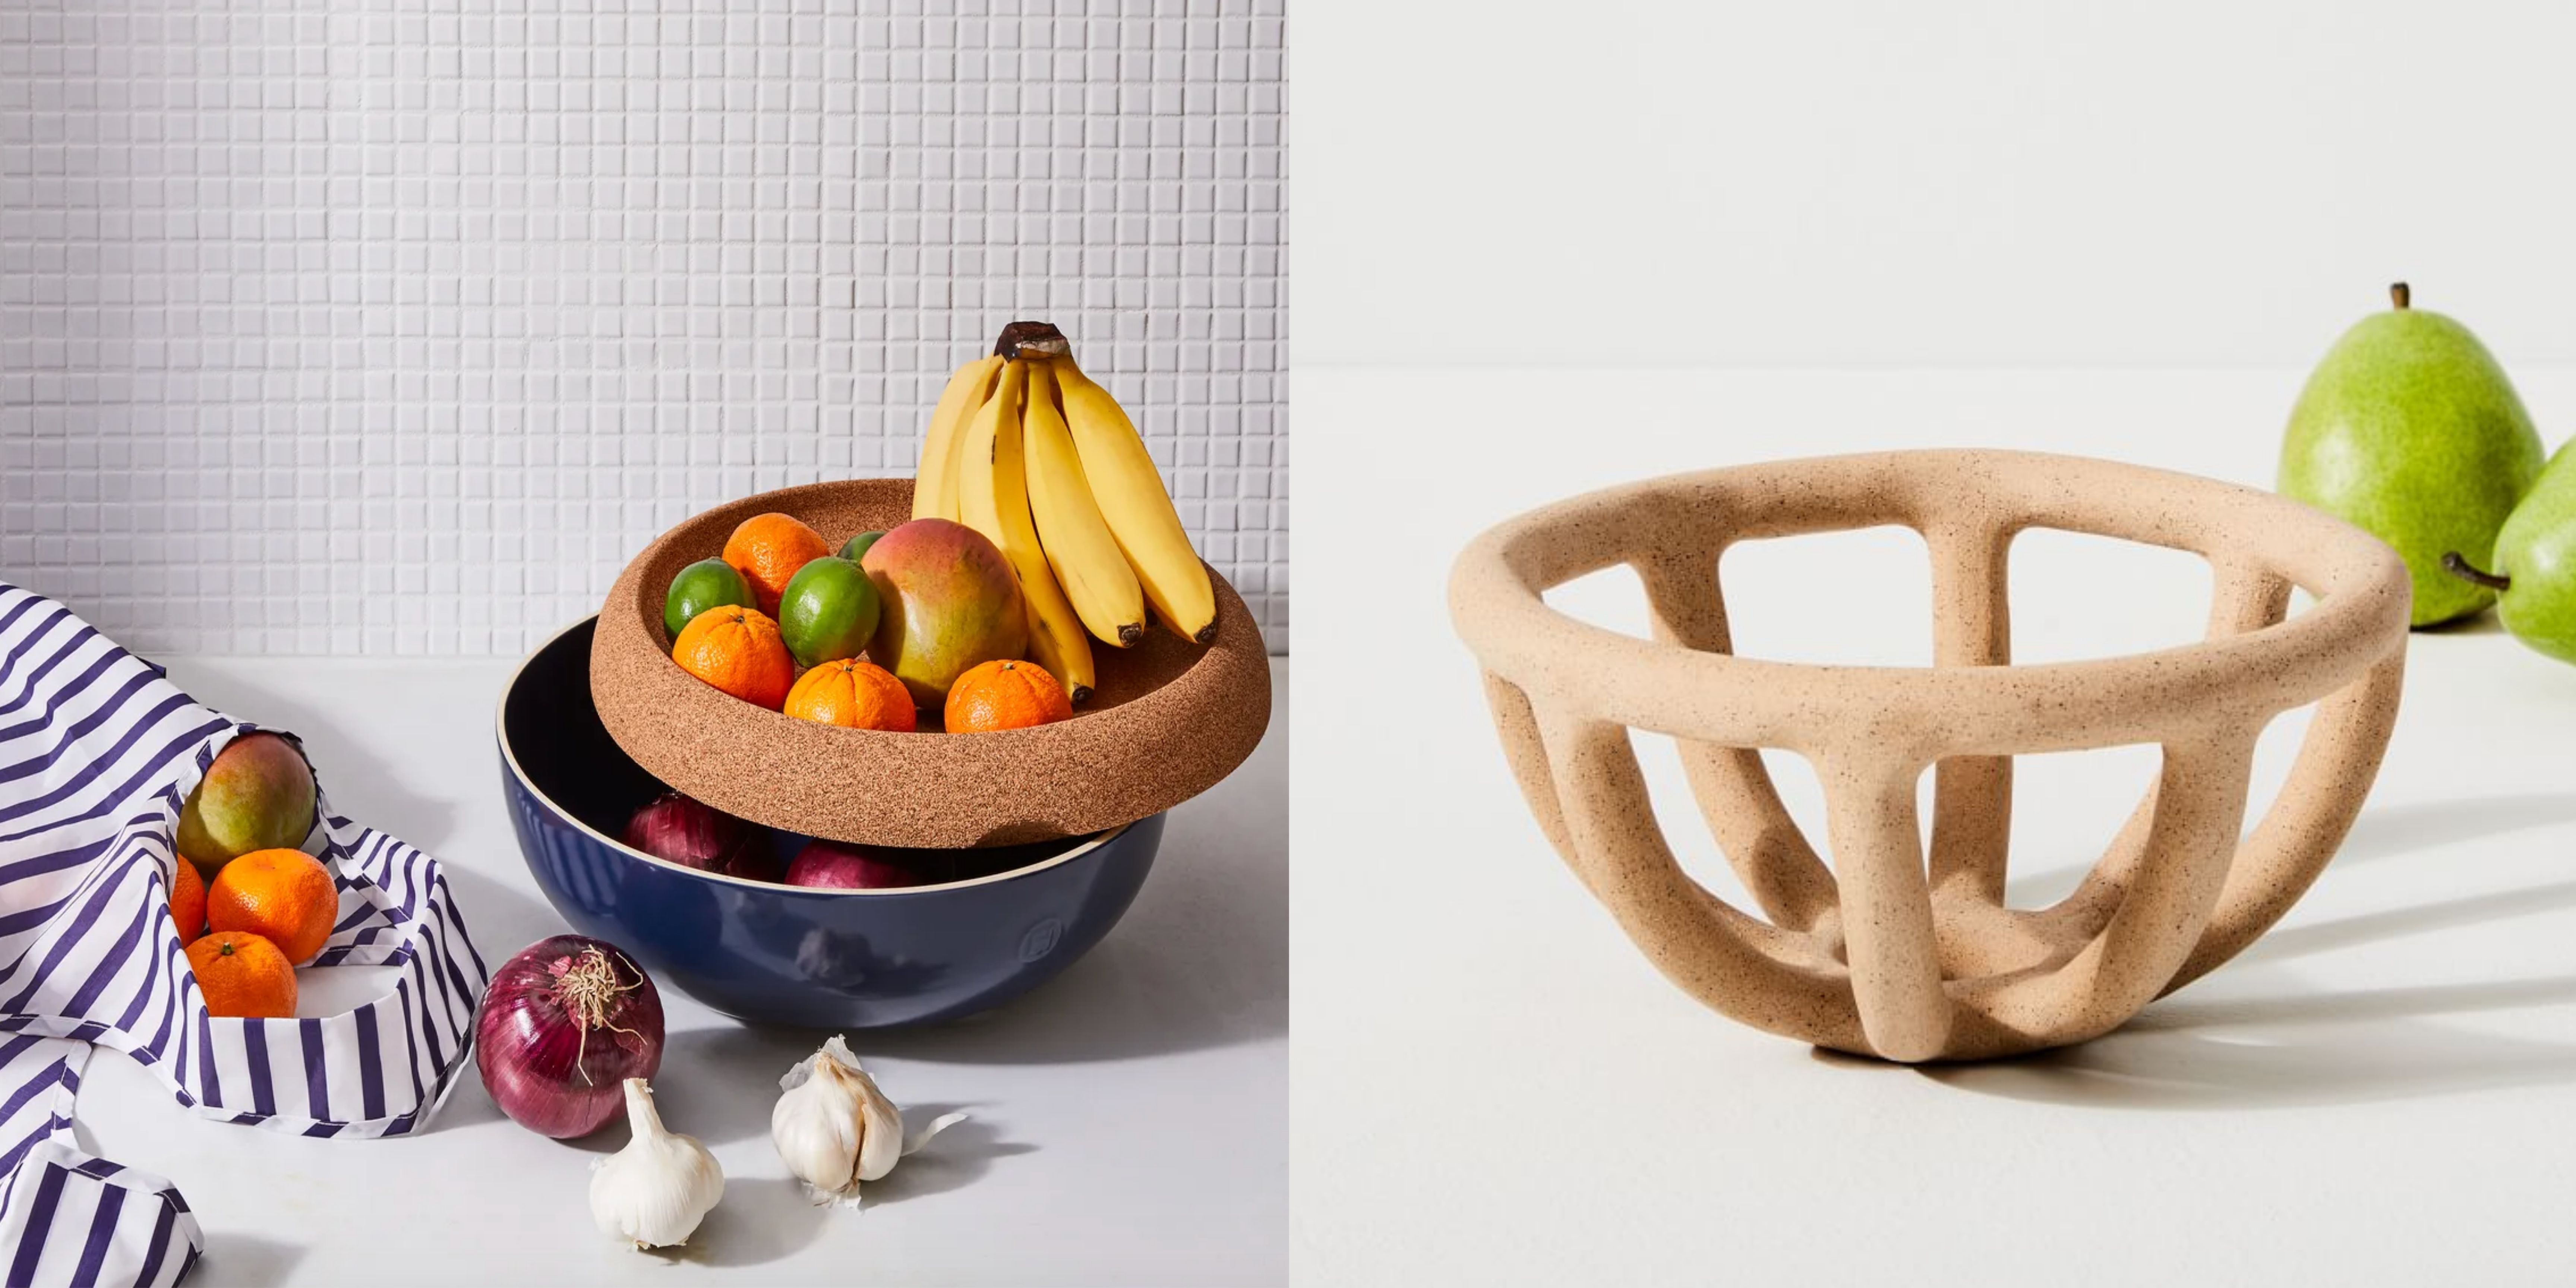 4 Fruit Storage Ideas That Will Put Your Basic Bowl to Shame